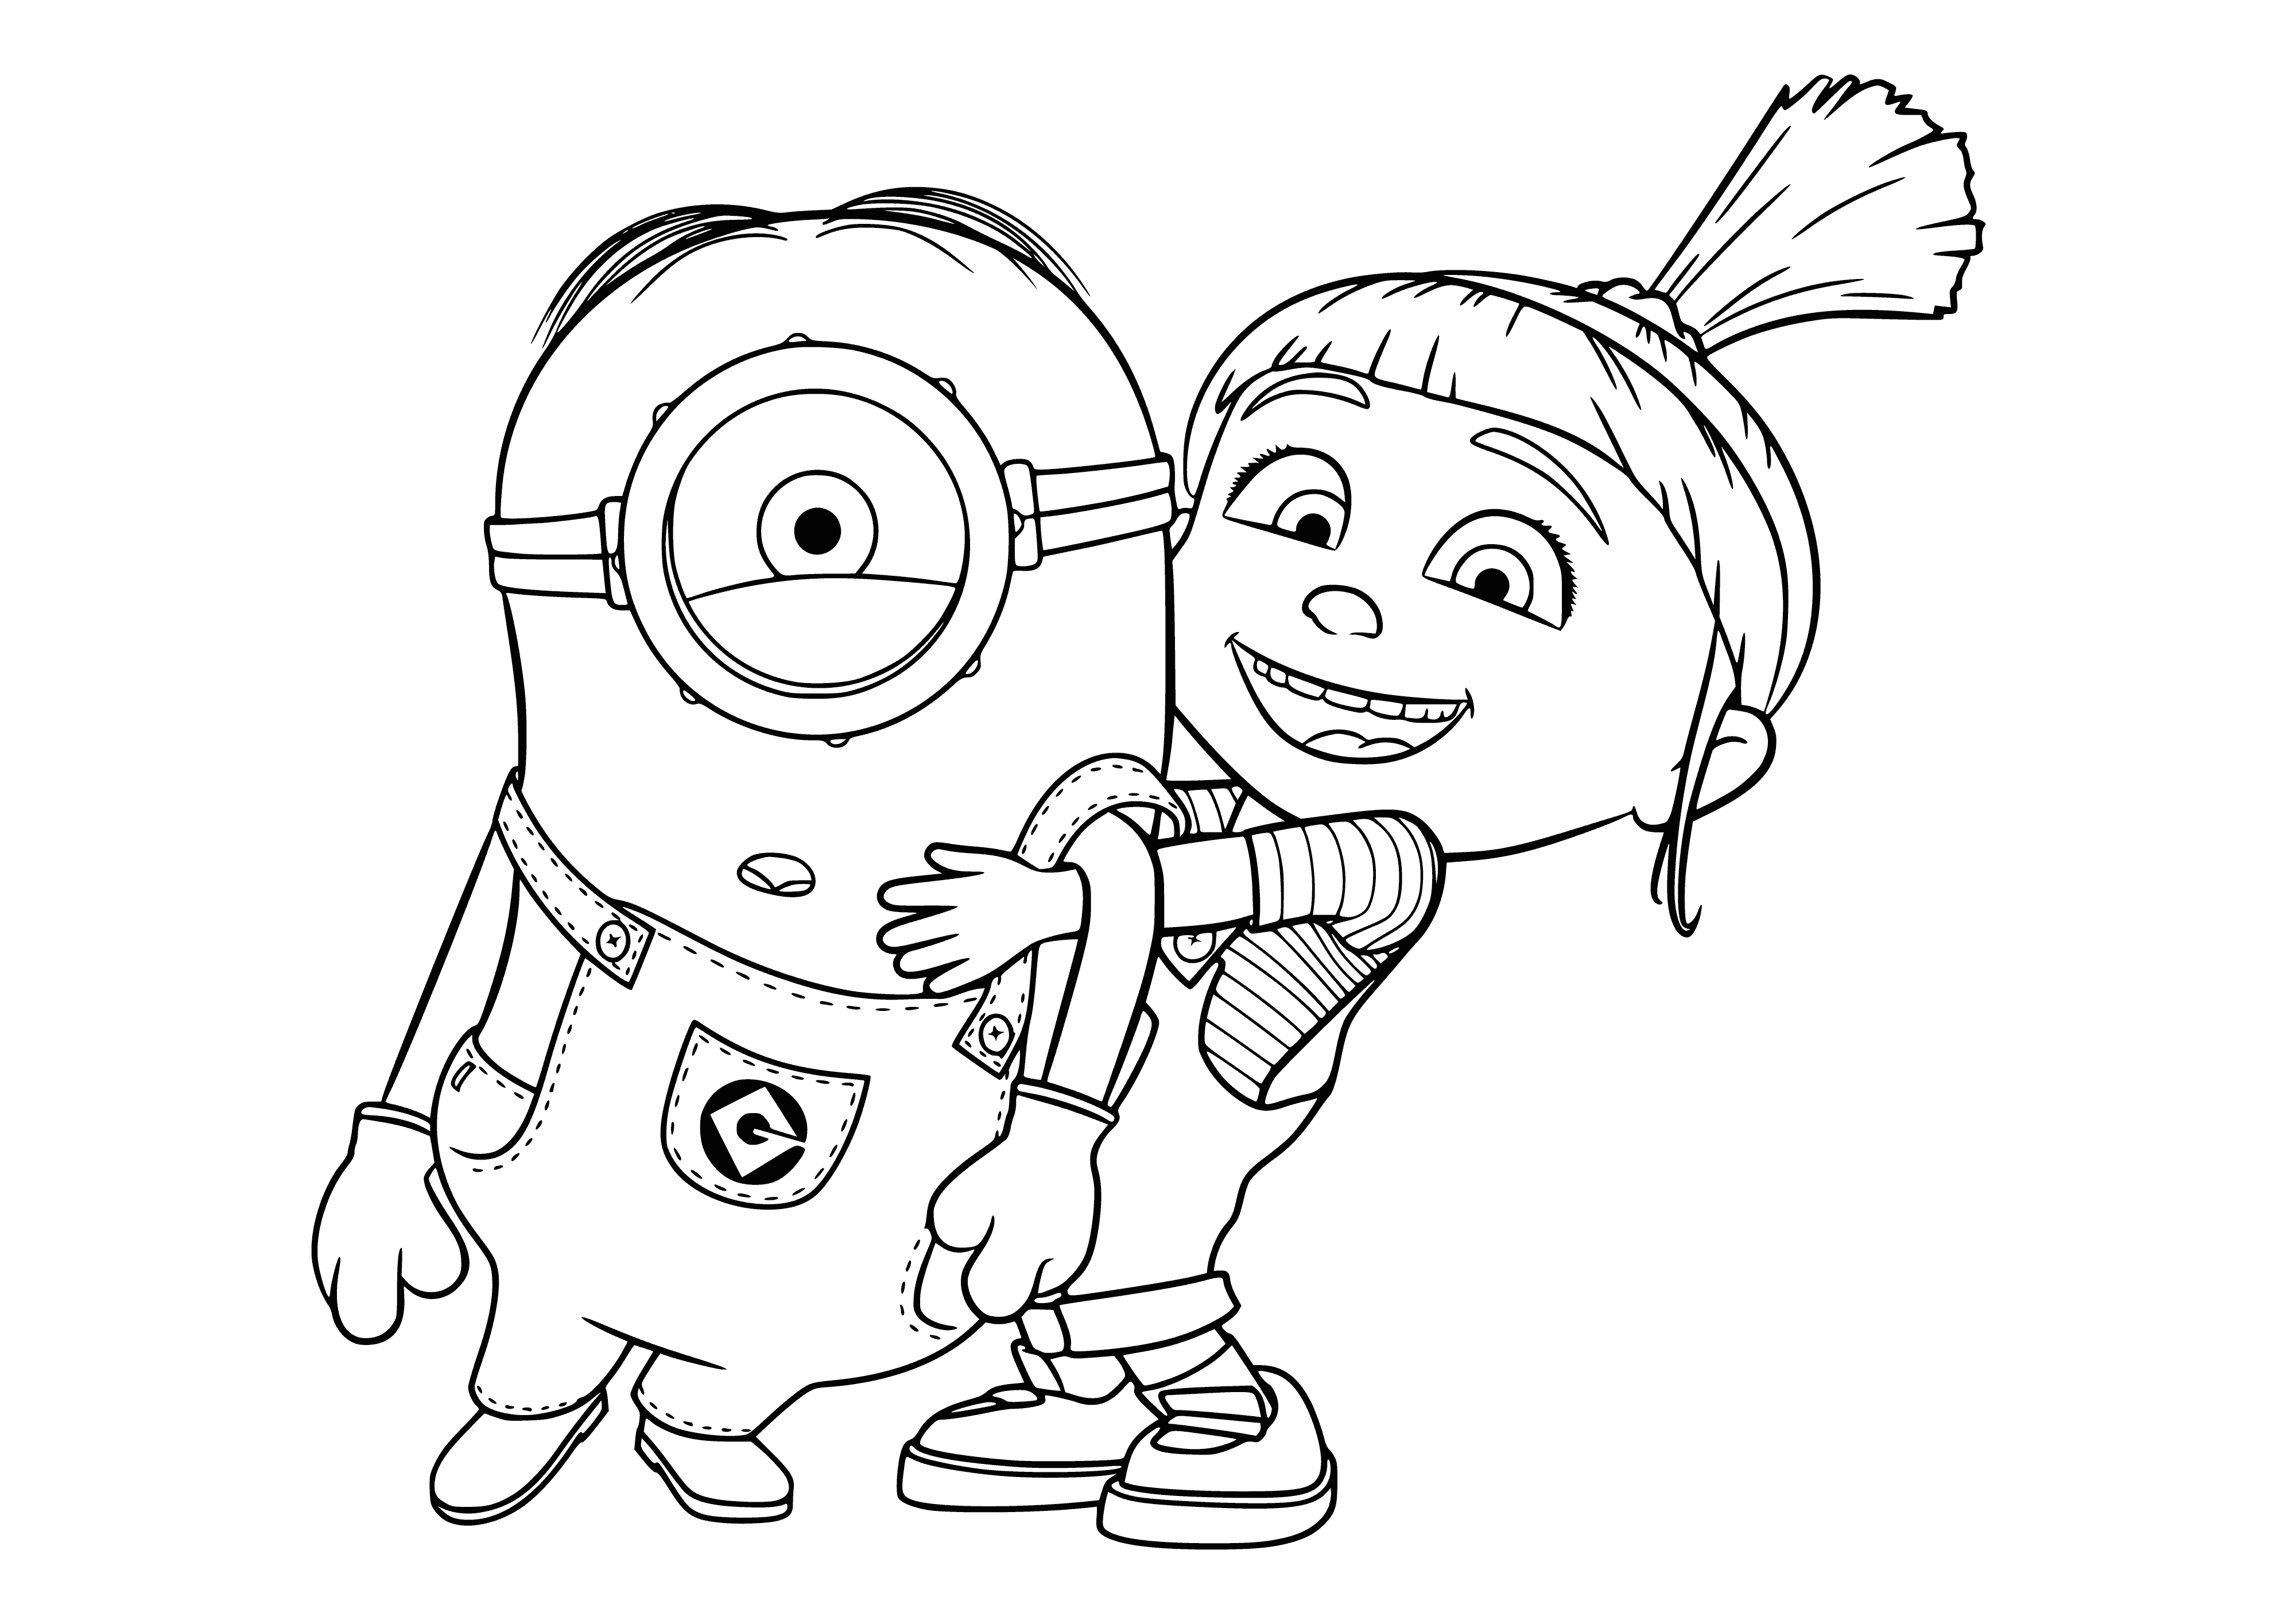 Agnes and Minon coloring page